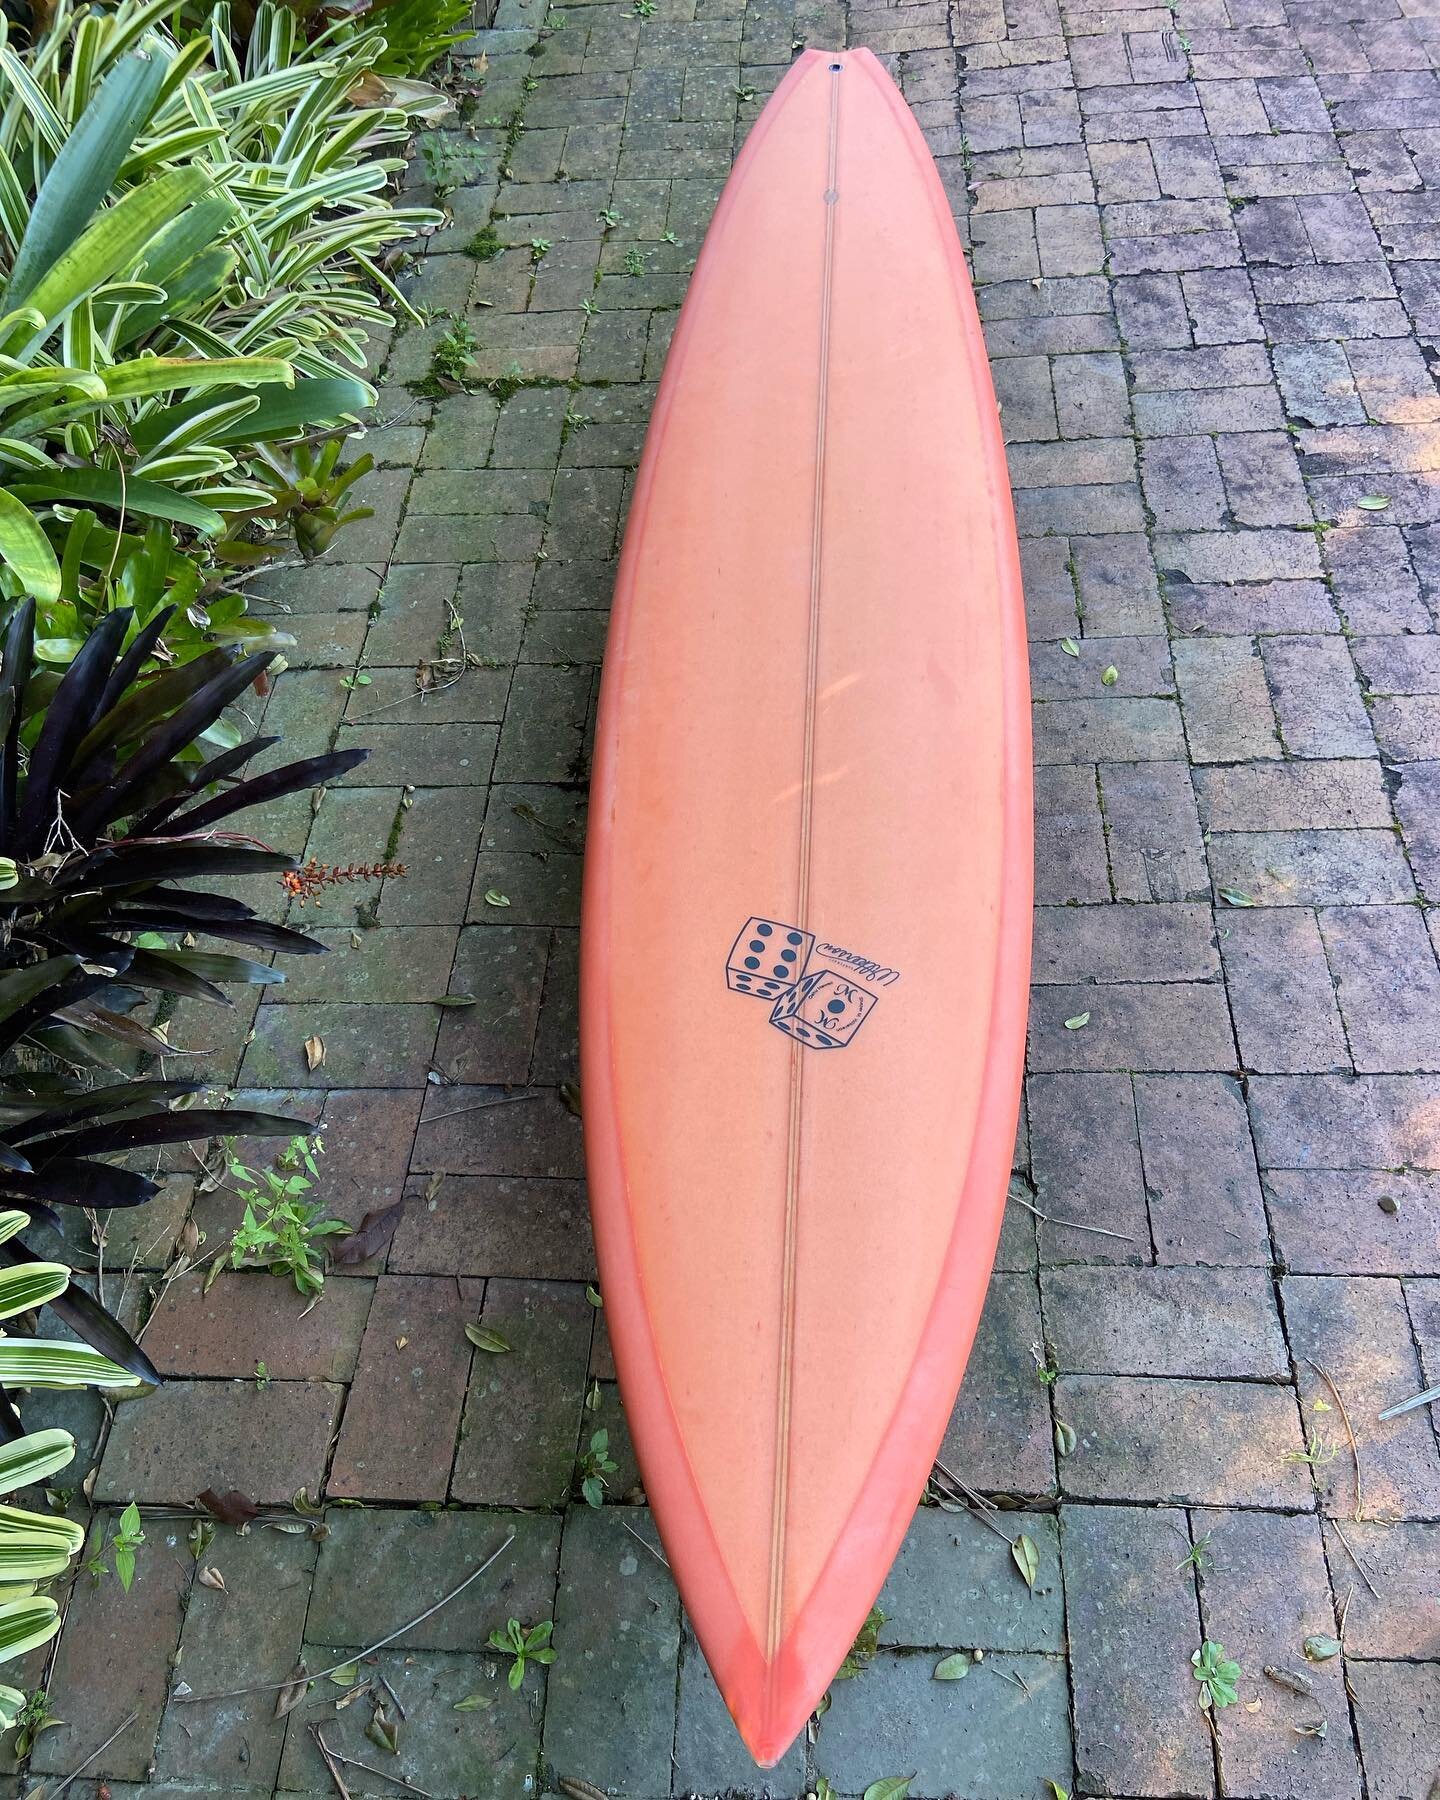 8&rsquo;2&rdquo; &bull; 19 &frac34; &bull; 2 11/16 &bull; custom Handshape for @joeykeogh1  This board features a fast outline with pulled in nose and baby swallow tail quad fin  combined with hawaii gun rocker and a 2 x 6mil stringer for strength.  